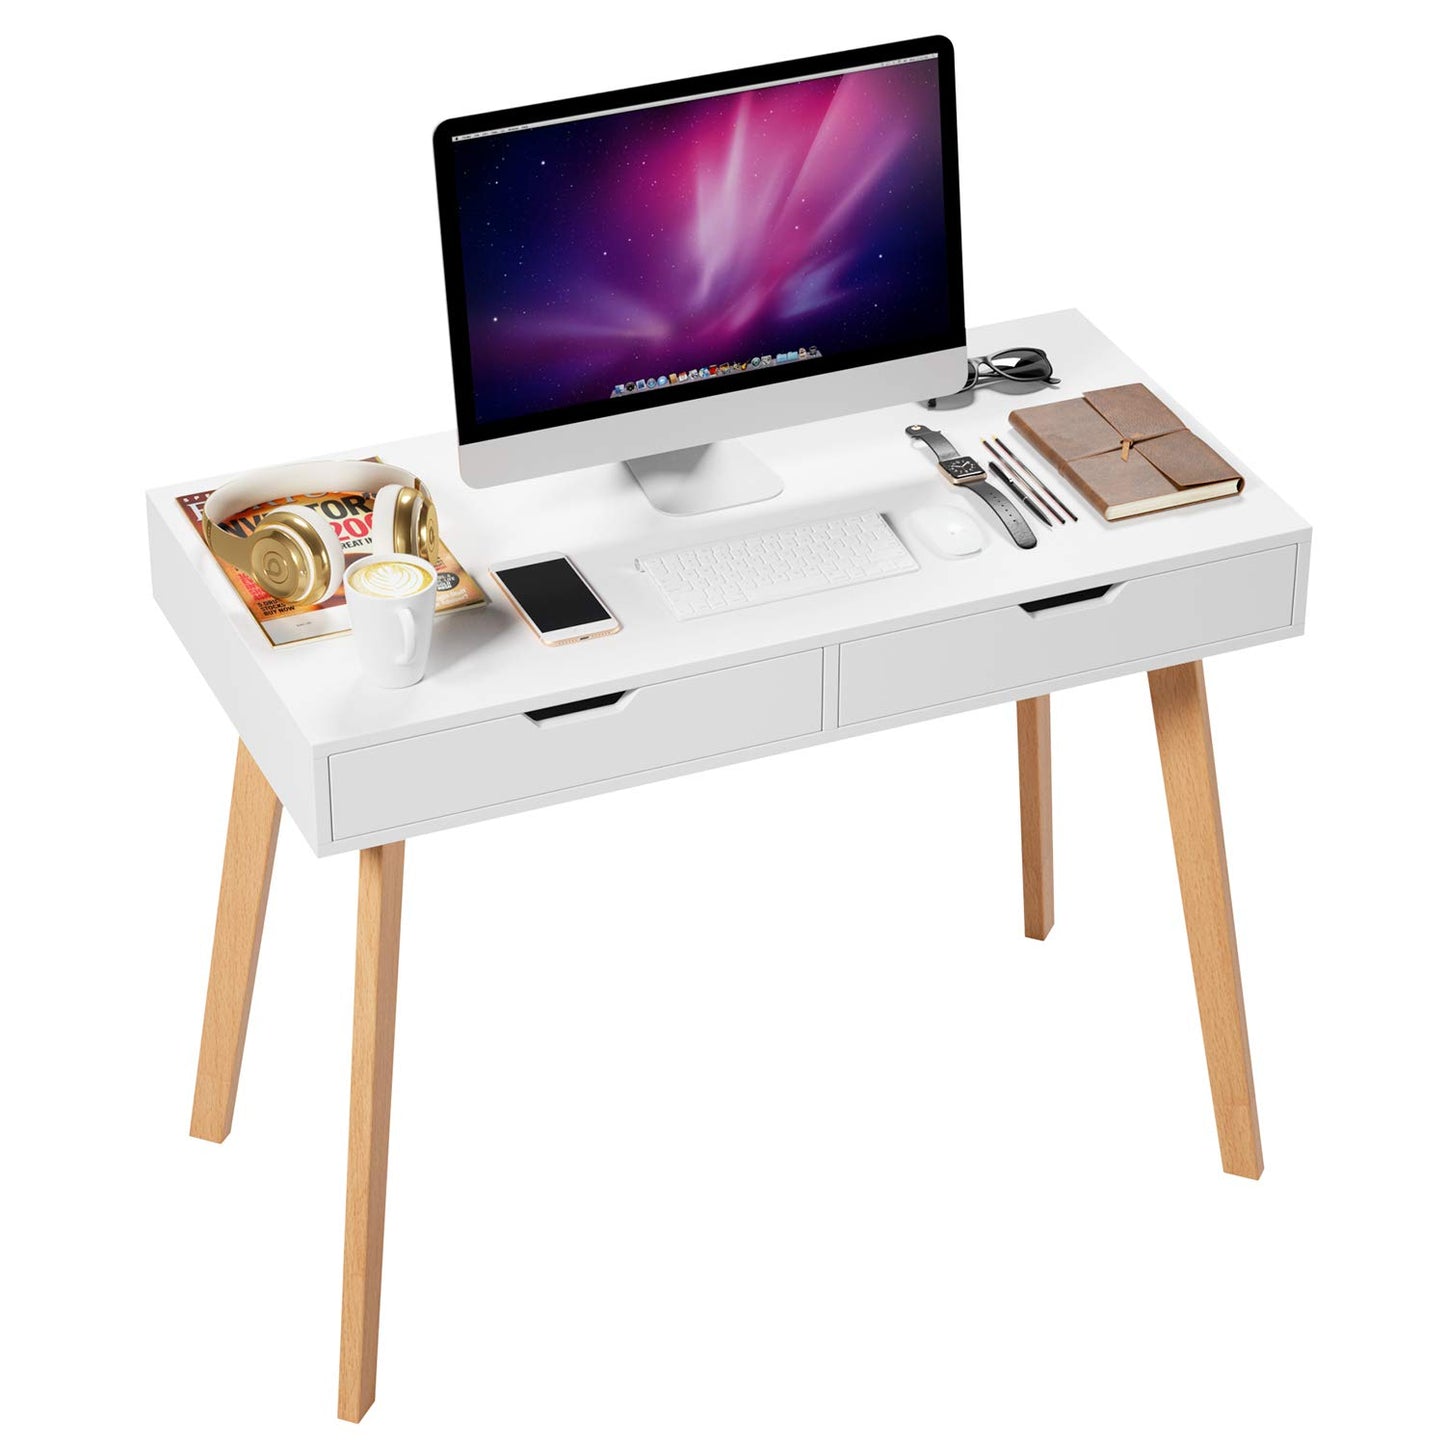 Homfa Desk Table Study Writing Table Durable For Computer For Studio Office Bedroom With 2 Drawers White 100 x 50 x 77 CM